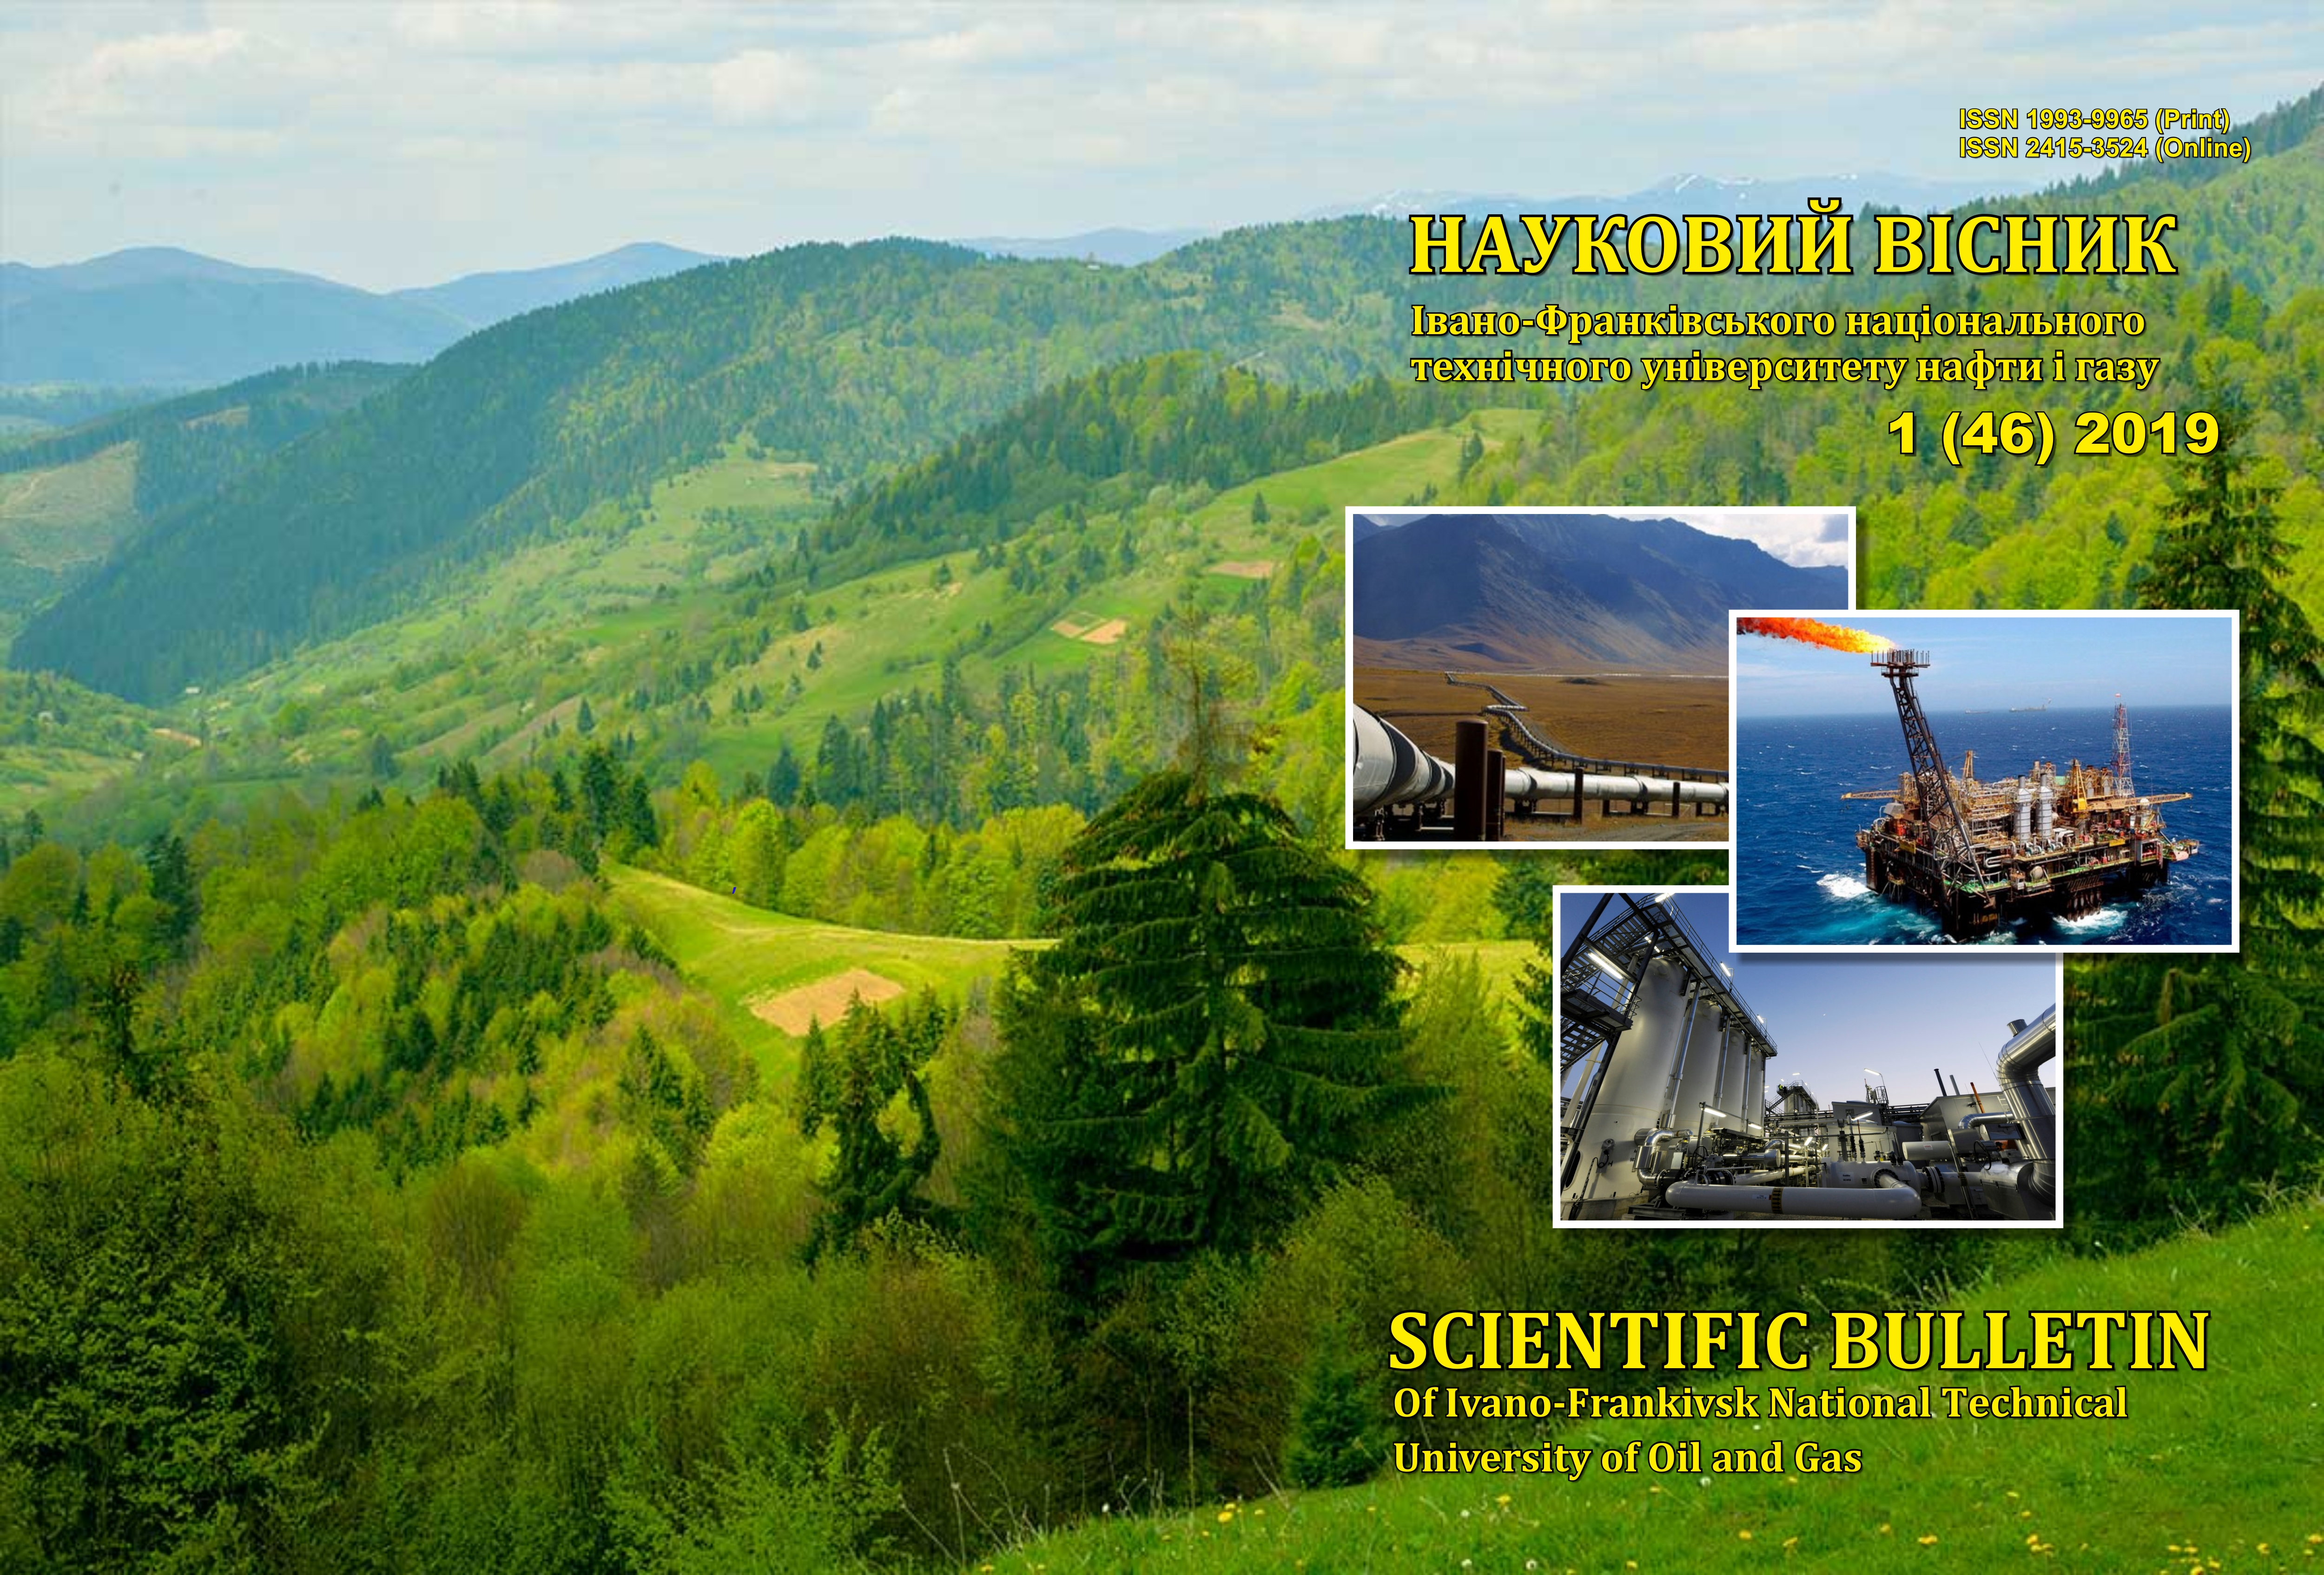 					View No. 1(46) (2019): SCIENTIFIC BULLETIN IVANO-FRANKIVSK NATIONAL TECHNICAL UNIVERSITY OF OIL AND GAS
				